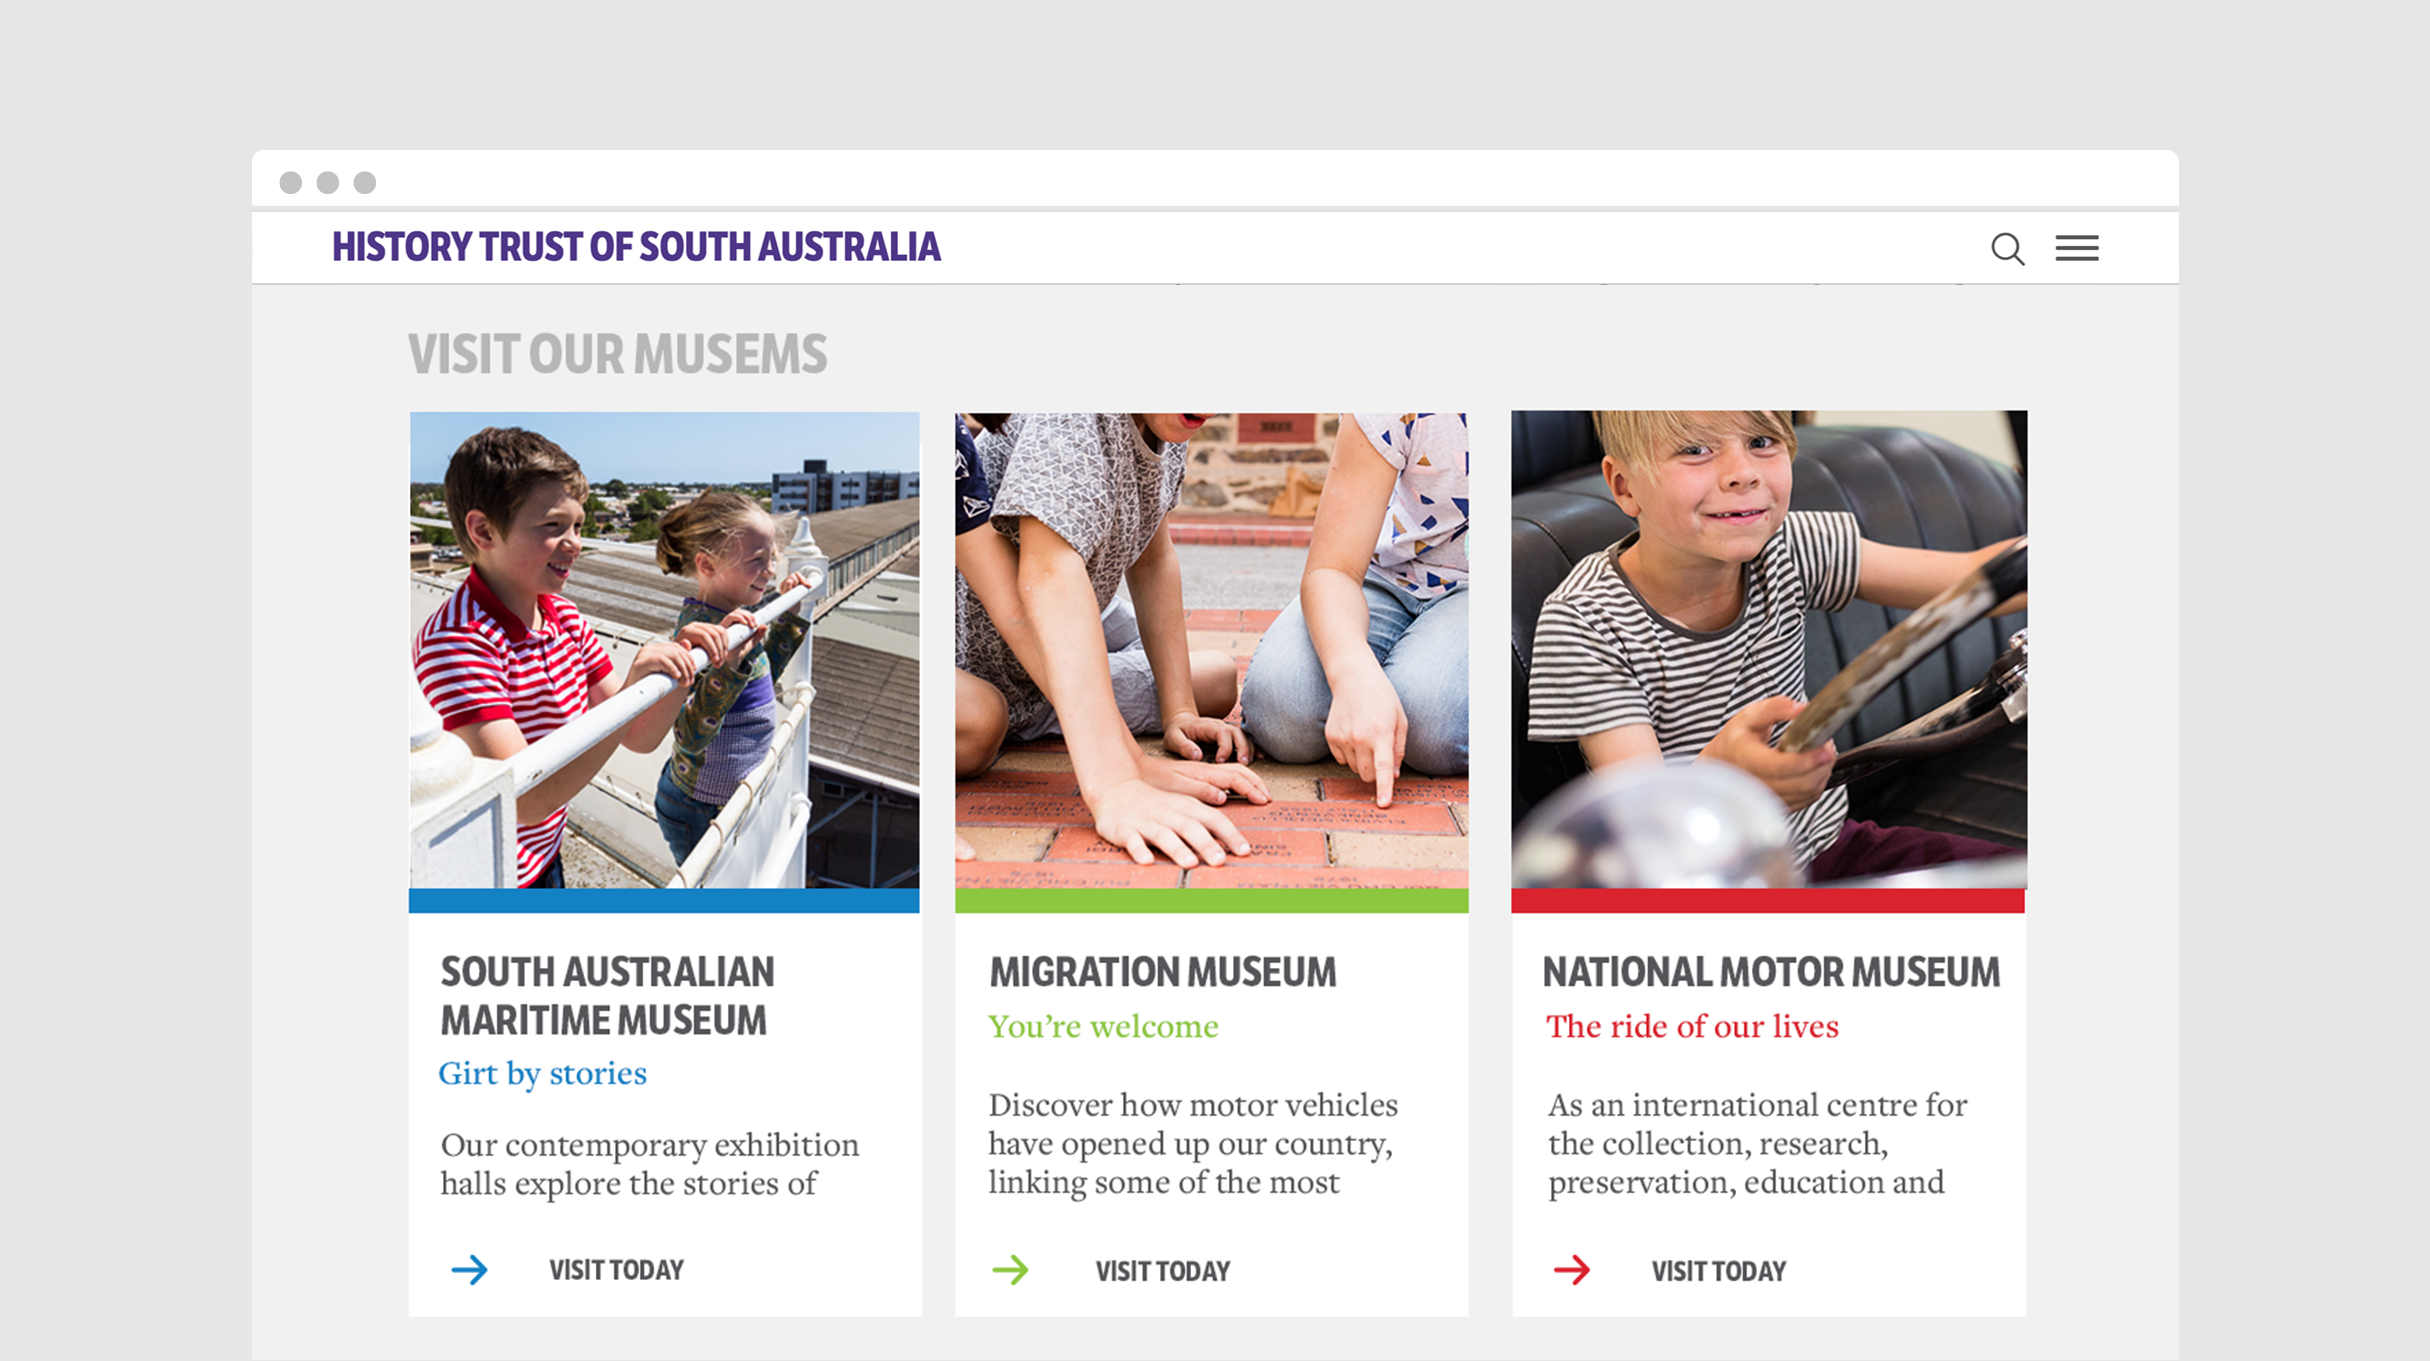 History Trust of South Australia - Website - Visit our museums